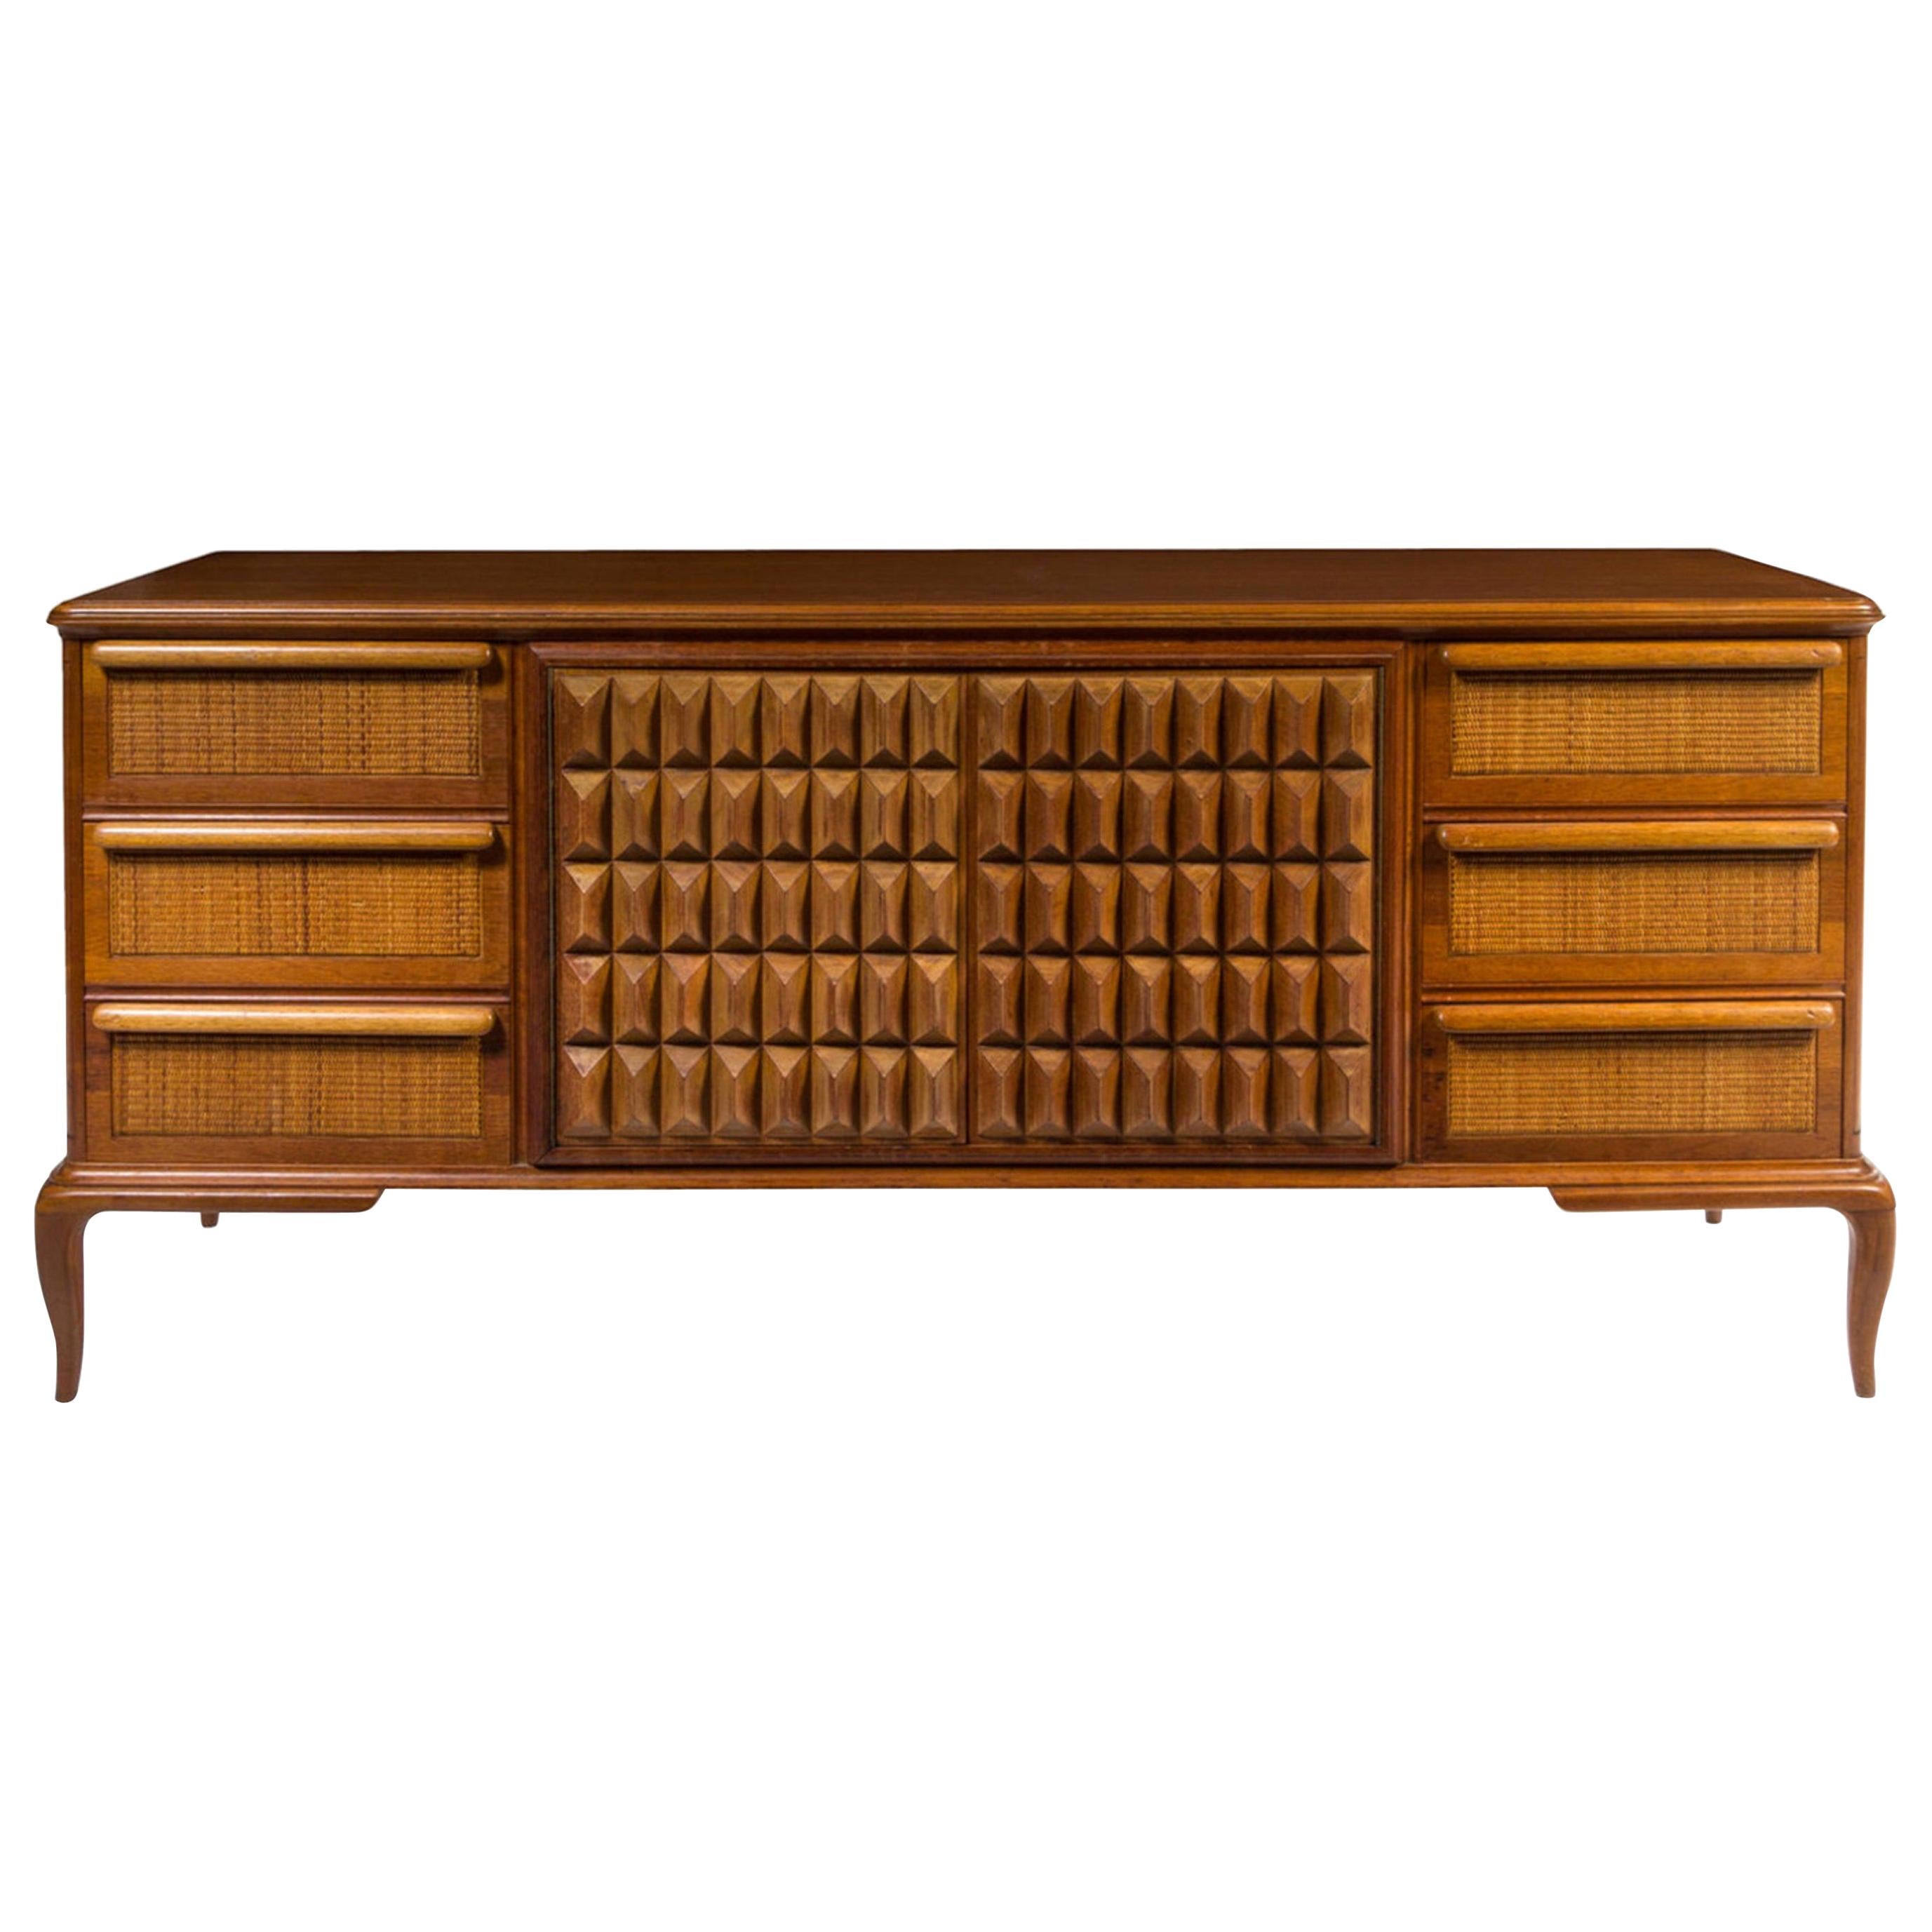 Spectacular Midcentury Italian Server, Walnut, Cane, Very Textural, Great Color